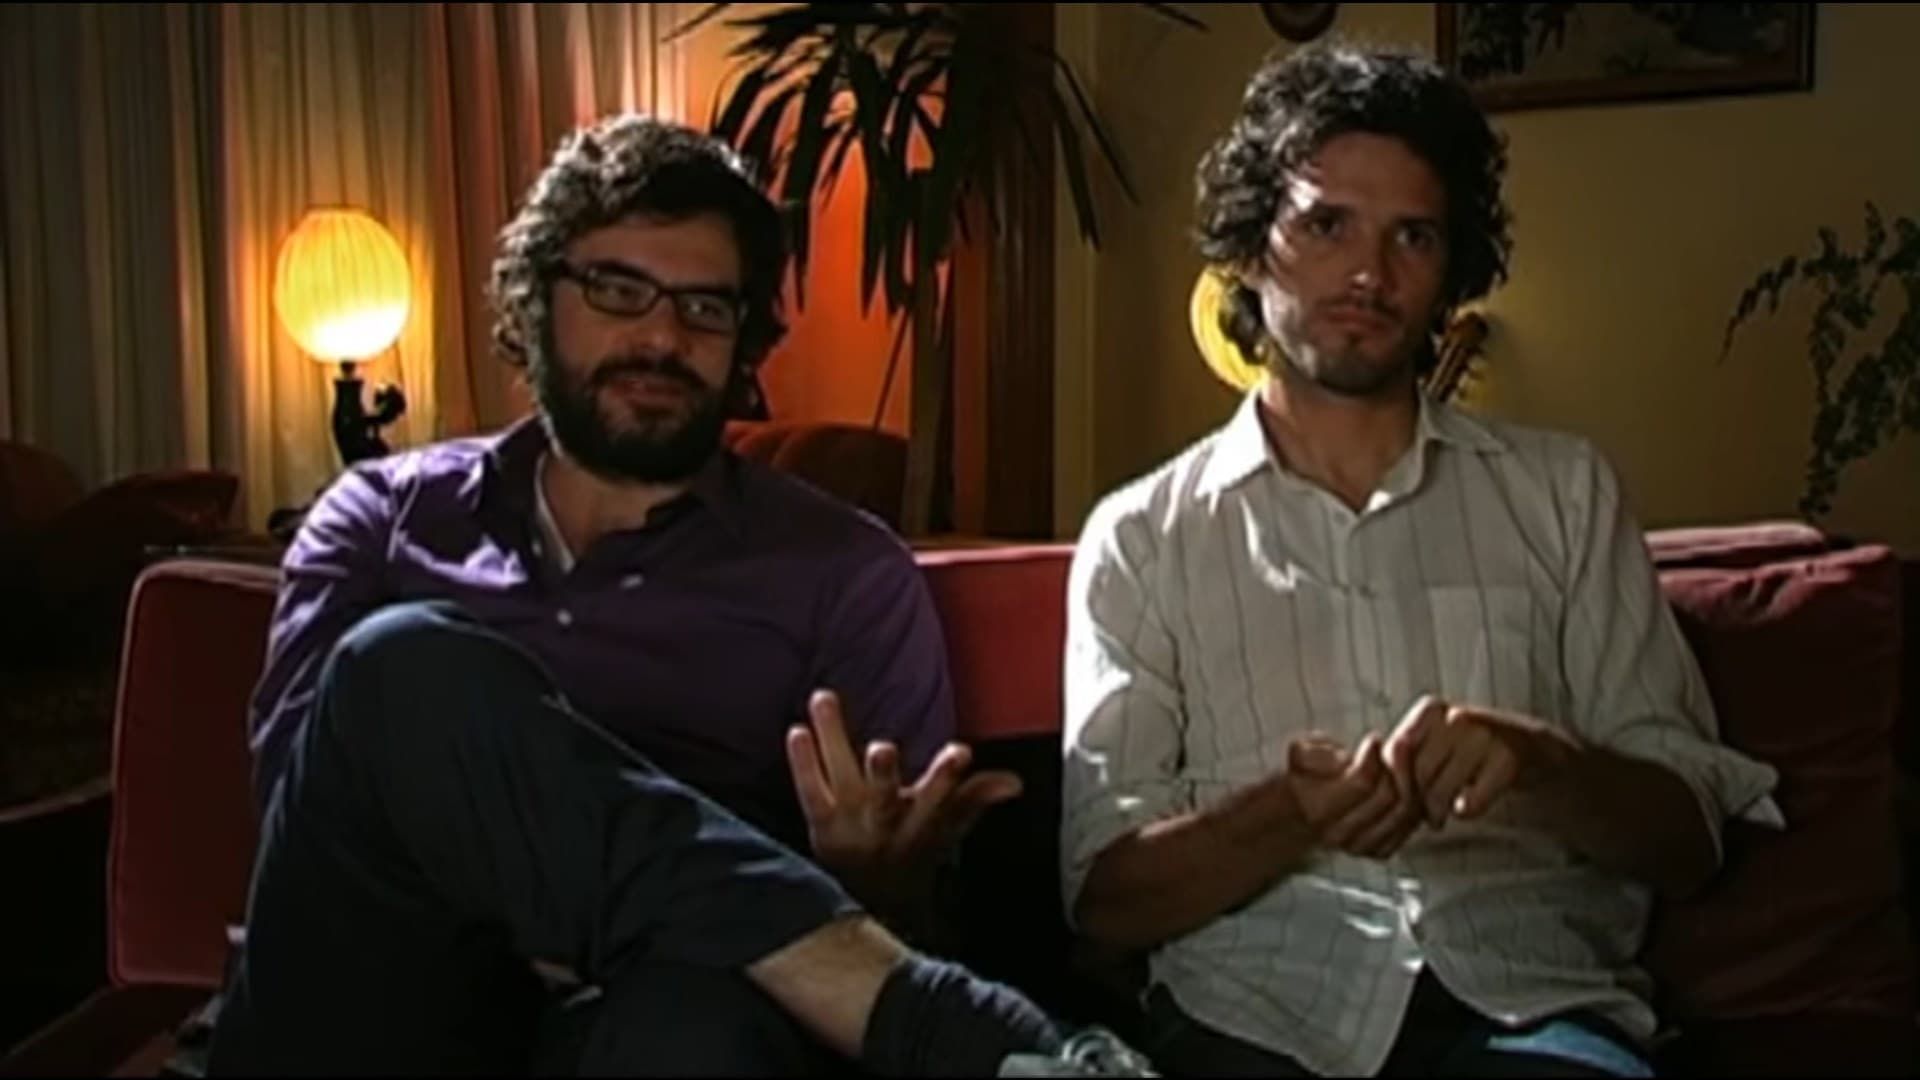 Flight of the Conchords: On Air background